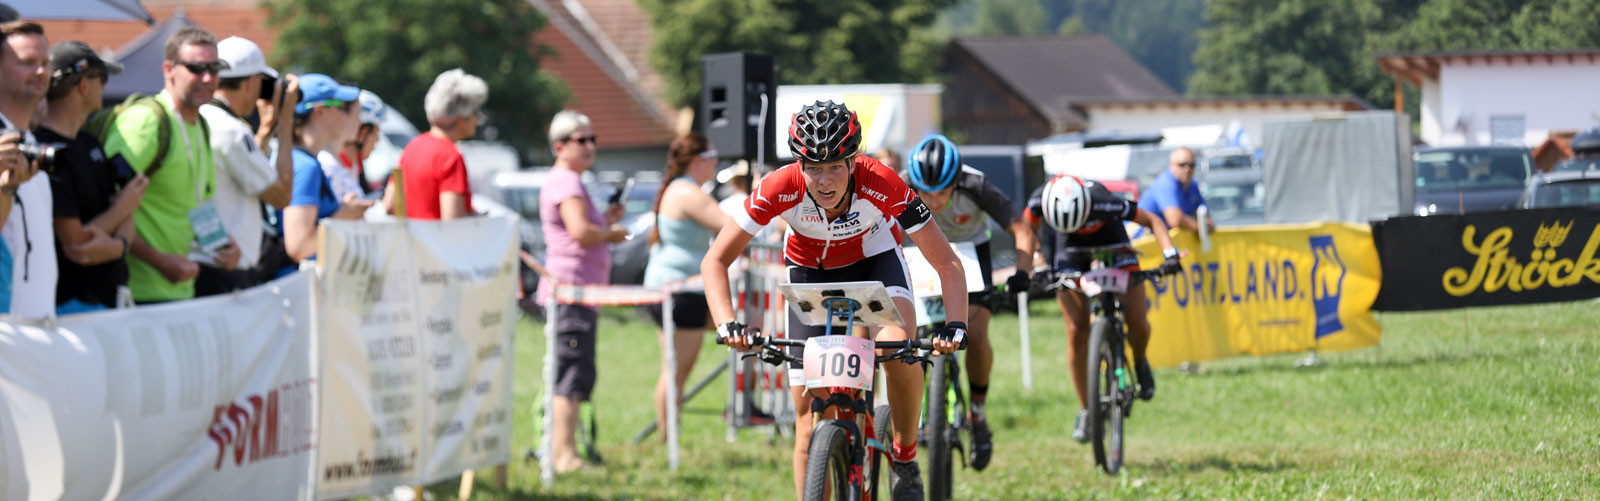 Long distance racing took its turn at this year's World Mountain Bike Orienteering Championships ©WMTBOC